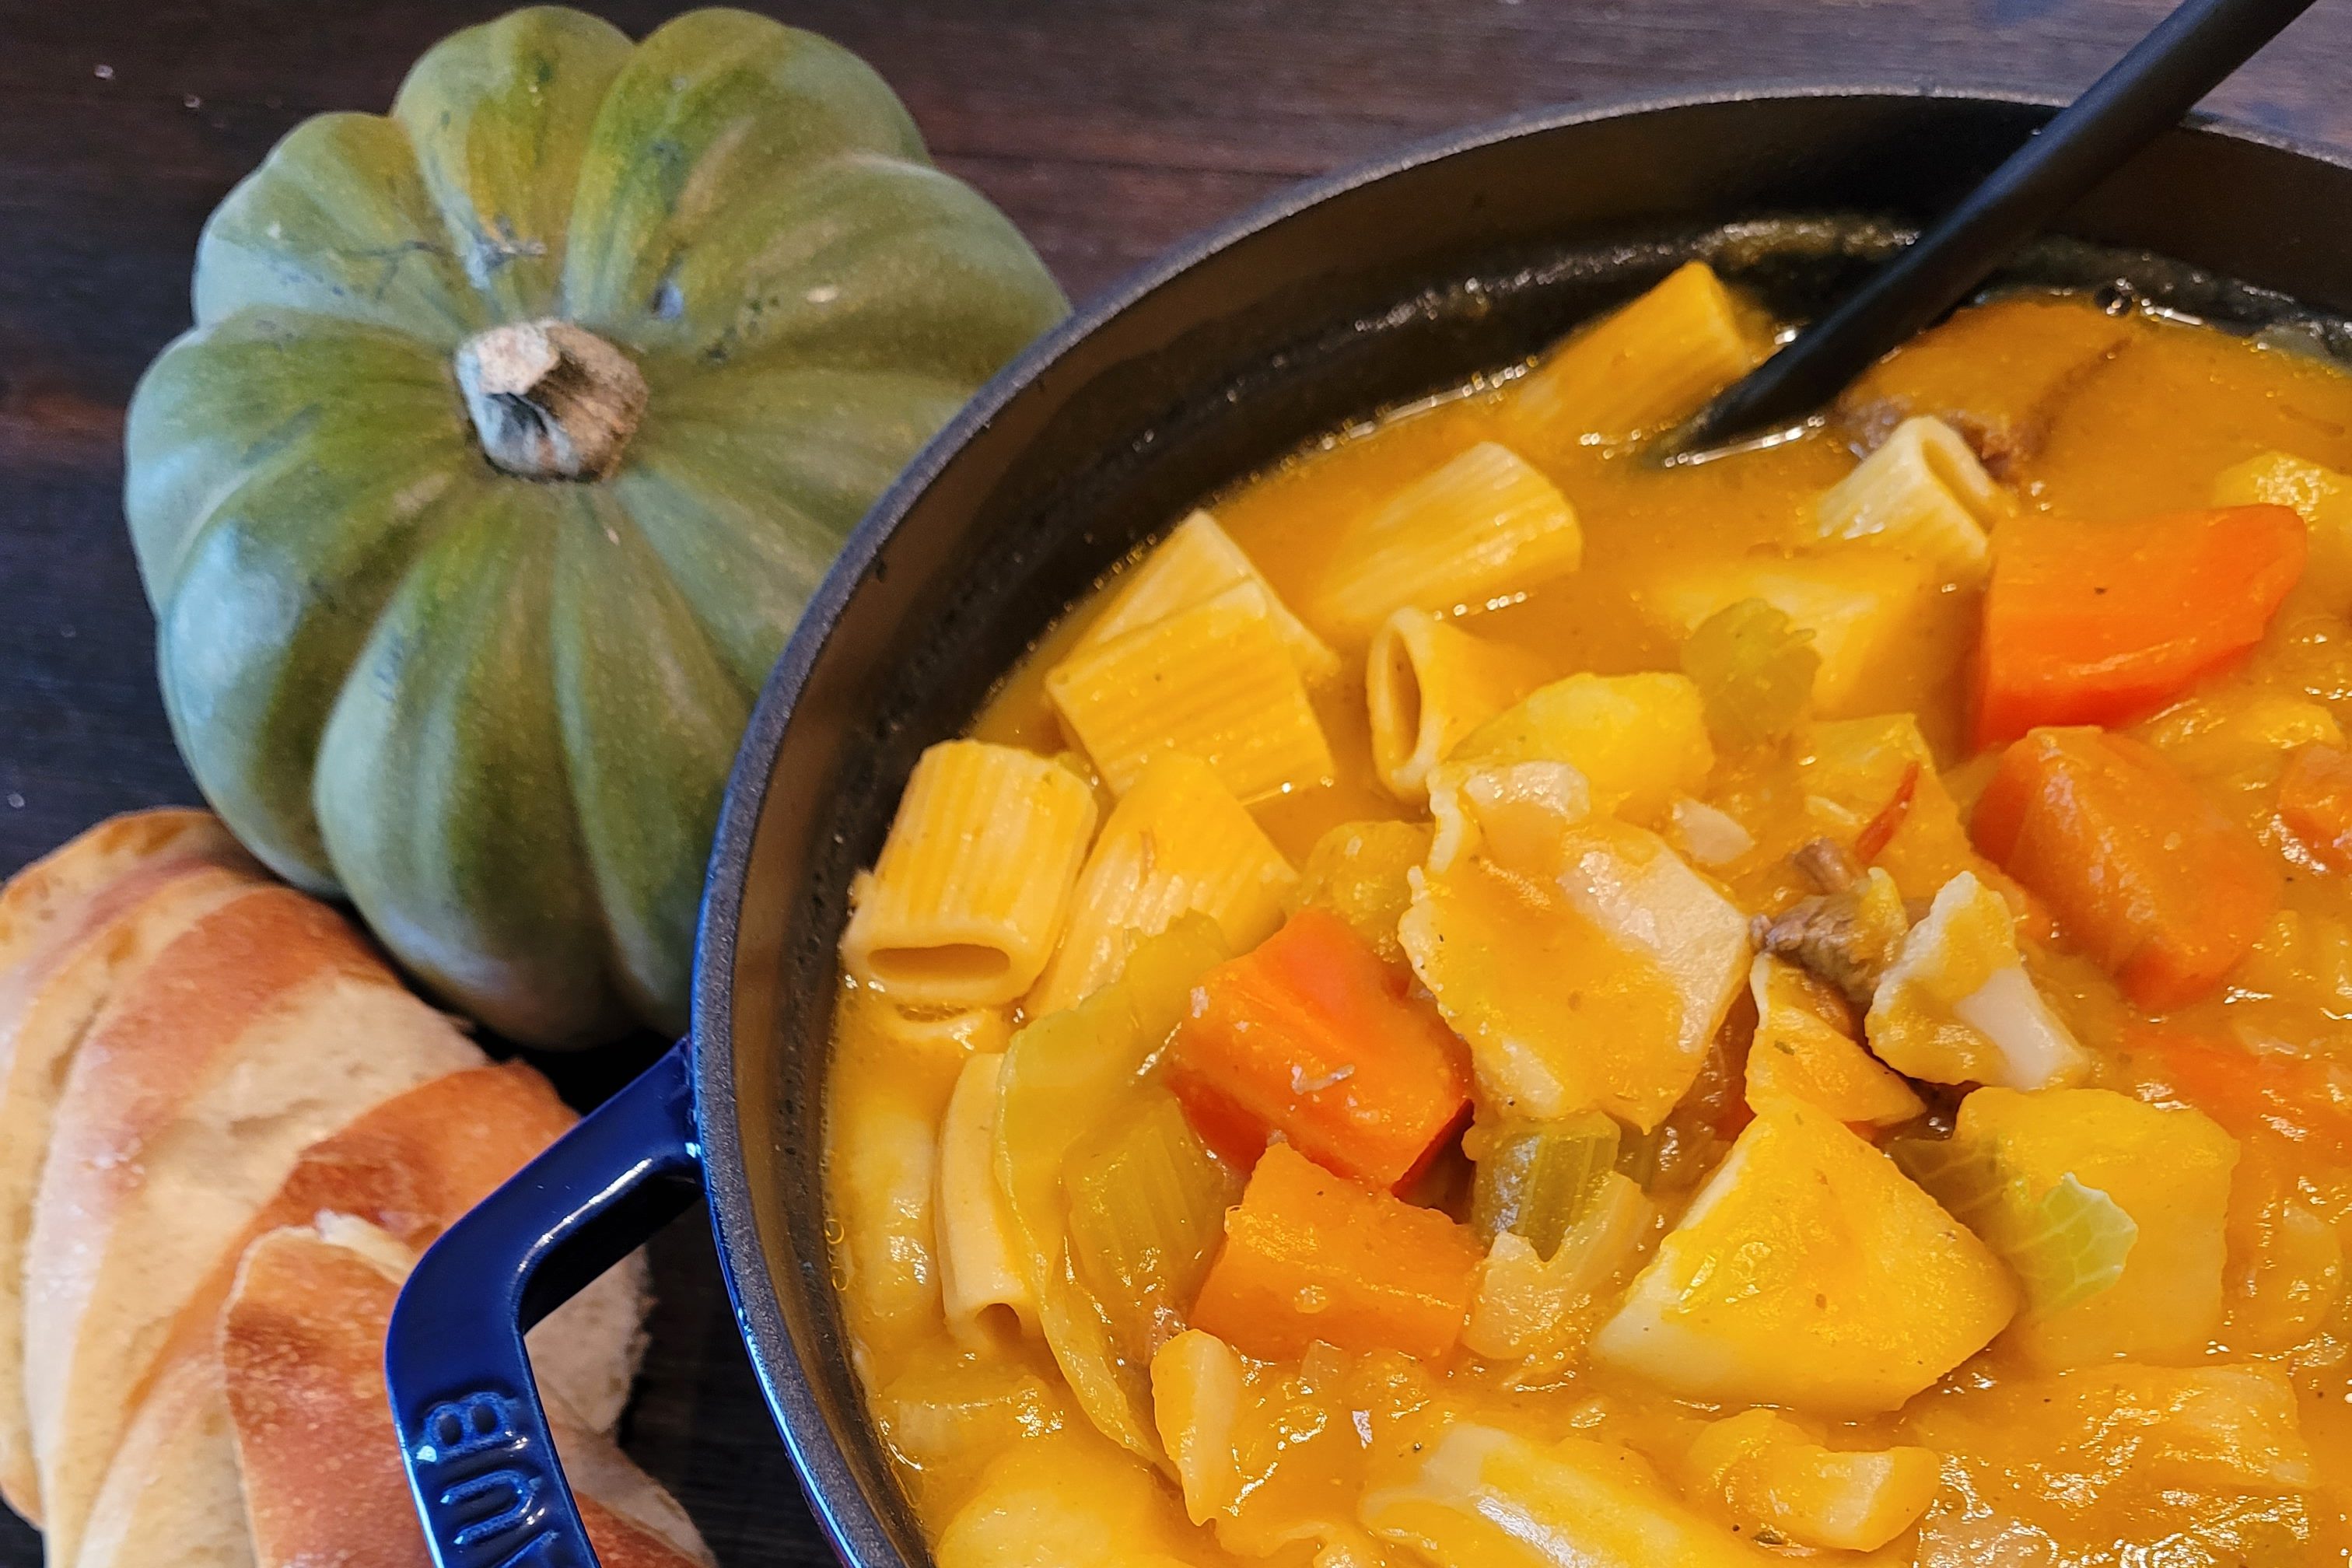 Chef Chris Viaud dishes up the squash soup at Ansanm in Milford, New Hampshire.